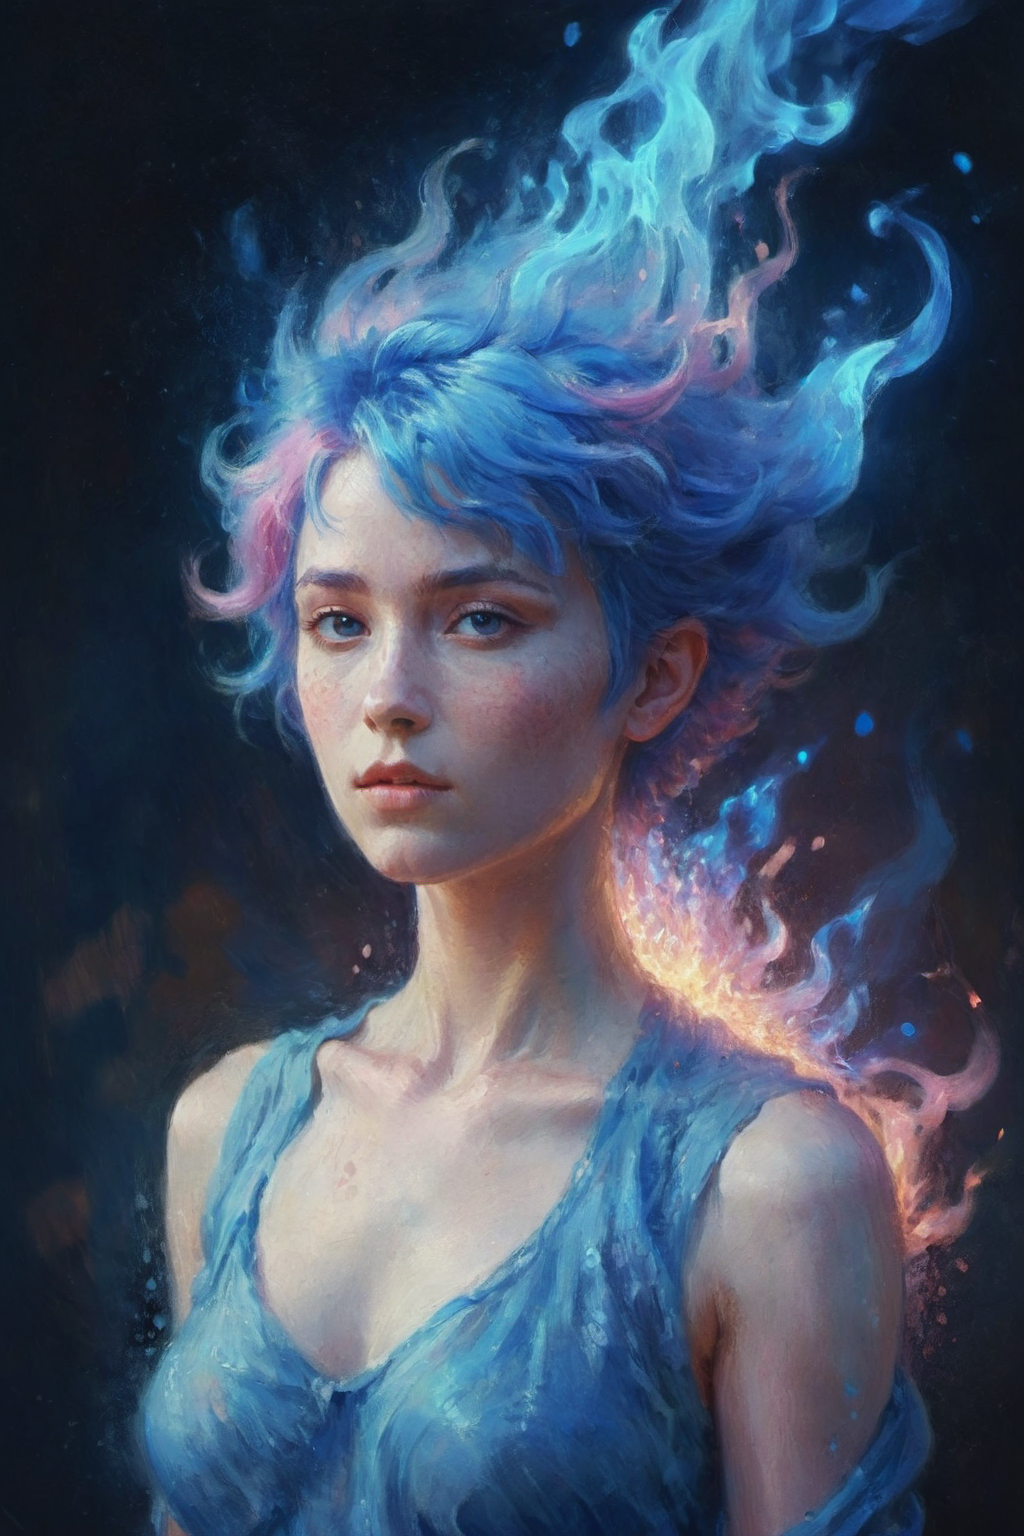 01062-2127104995-A female character with blue flame-like hair,with blue and pink particles flashing around her body,mysterious and aesthetically.png